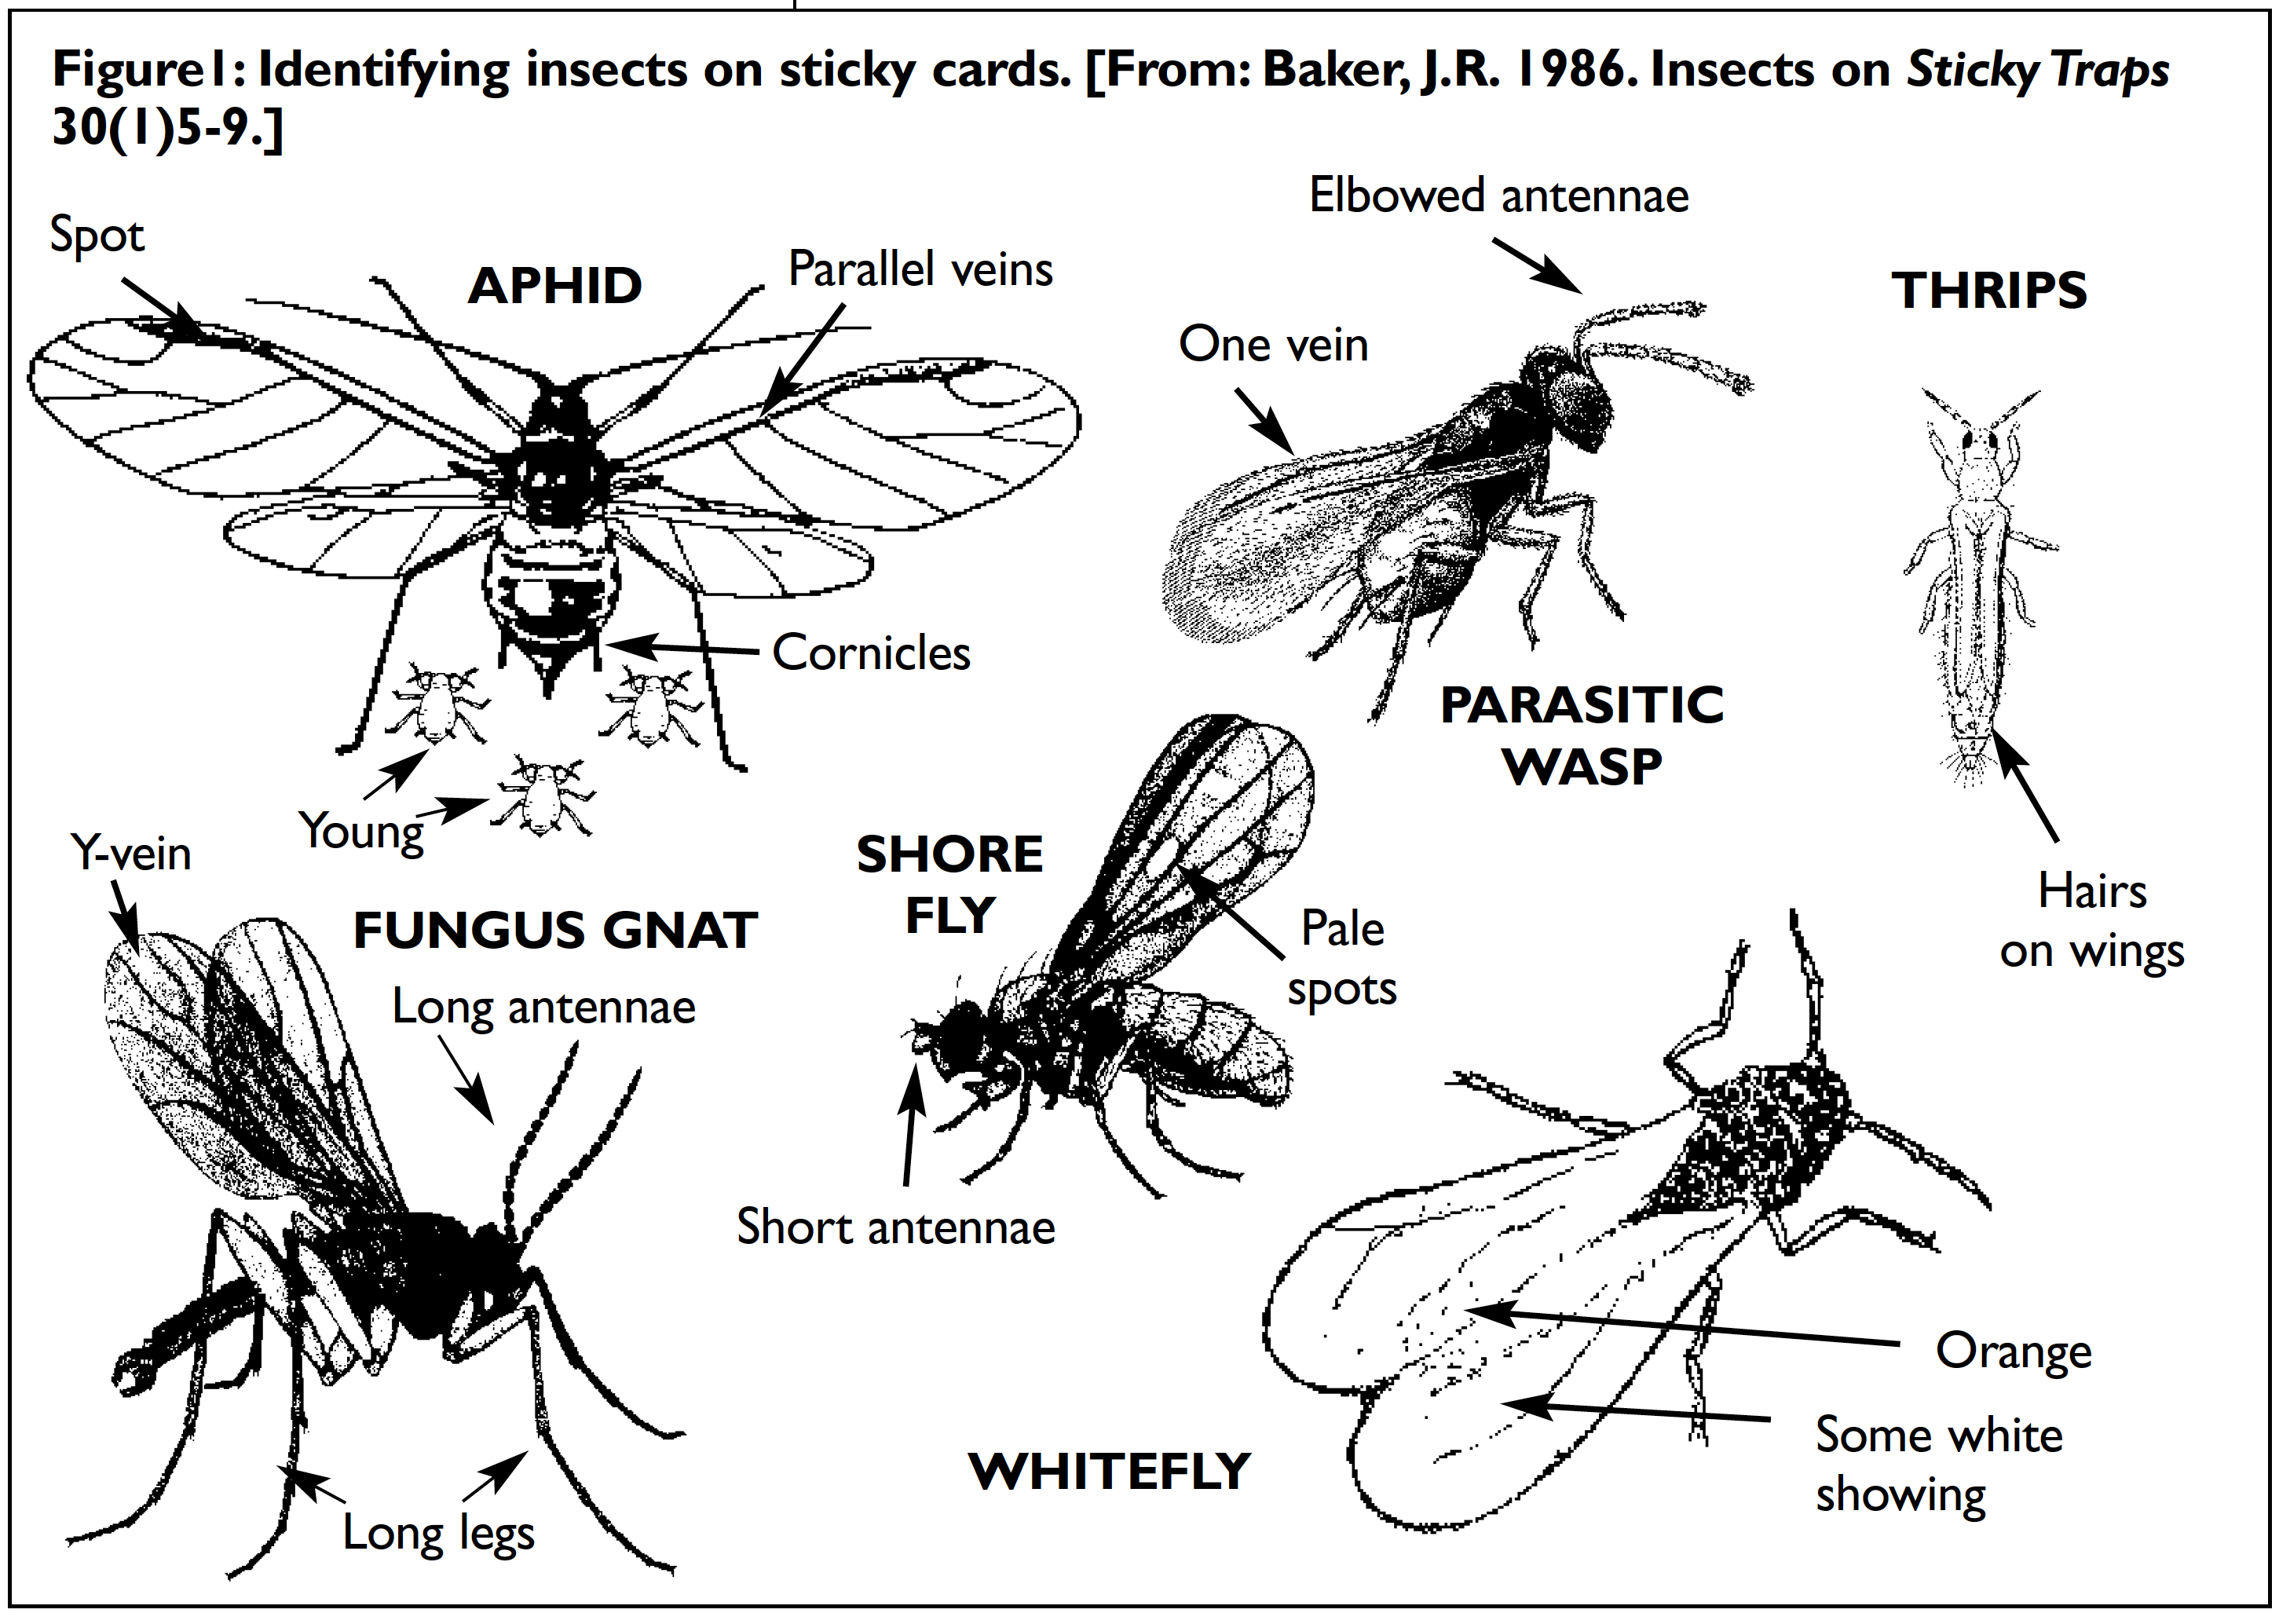 Figure 1: Identifying Insects on Sticky Cards